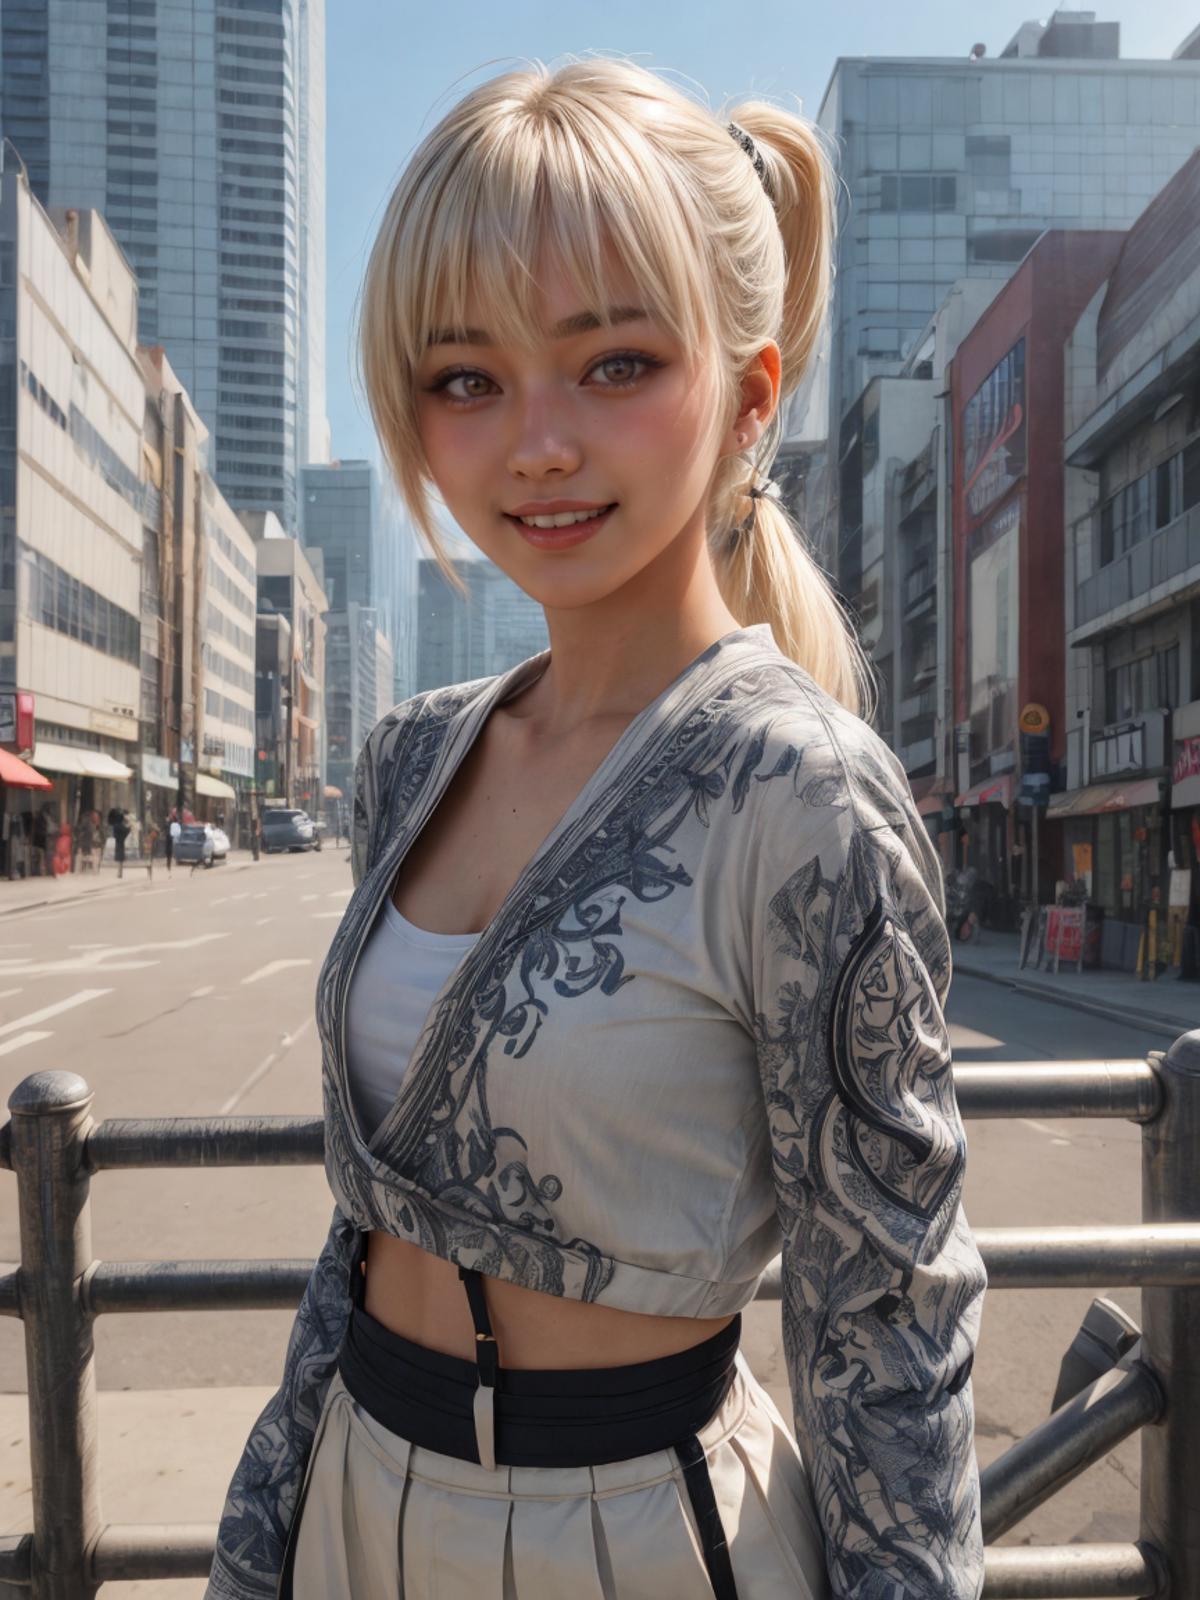 A young woman with blonde hair and a ponytail wearing a grey coat and black pants, posing for a photo on a street.